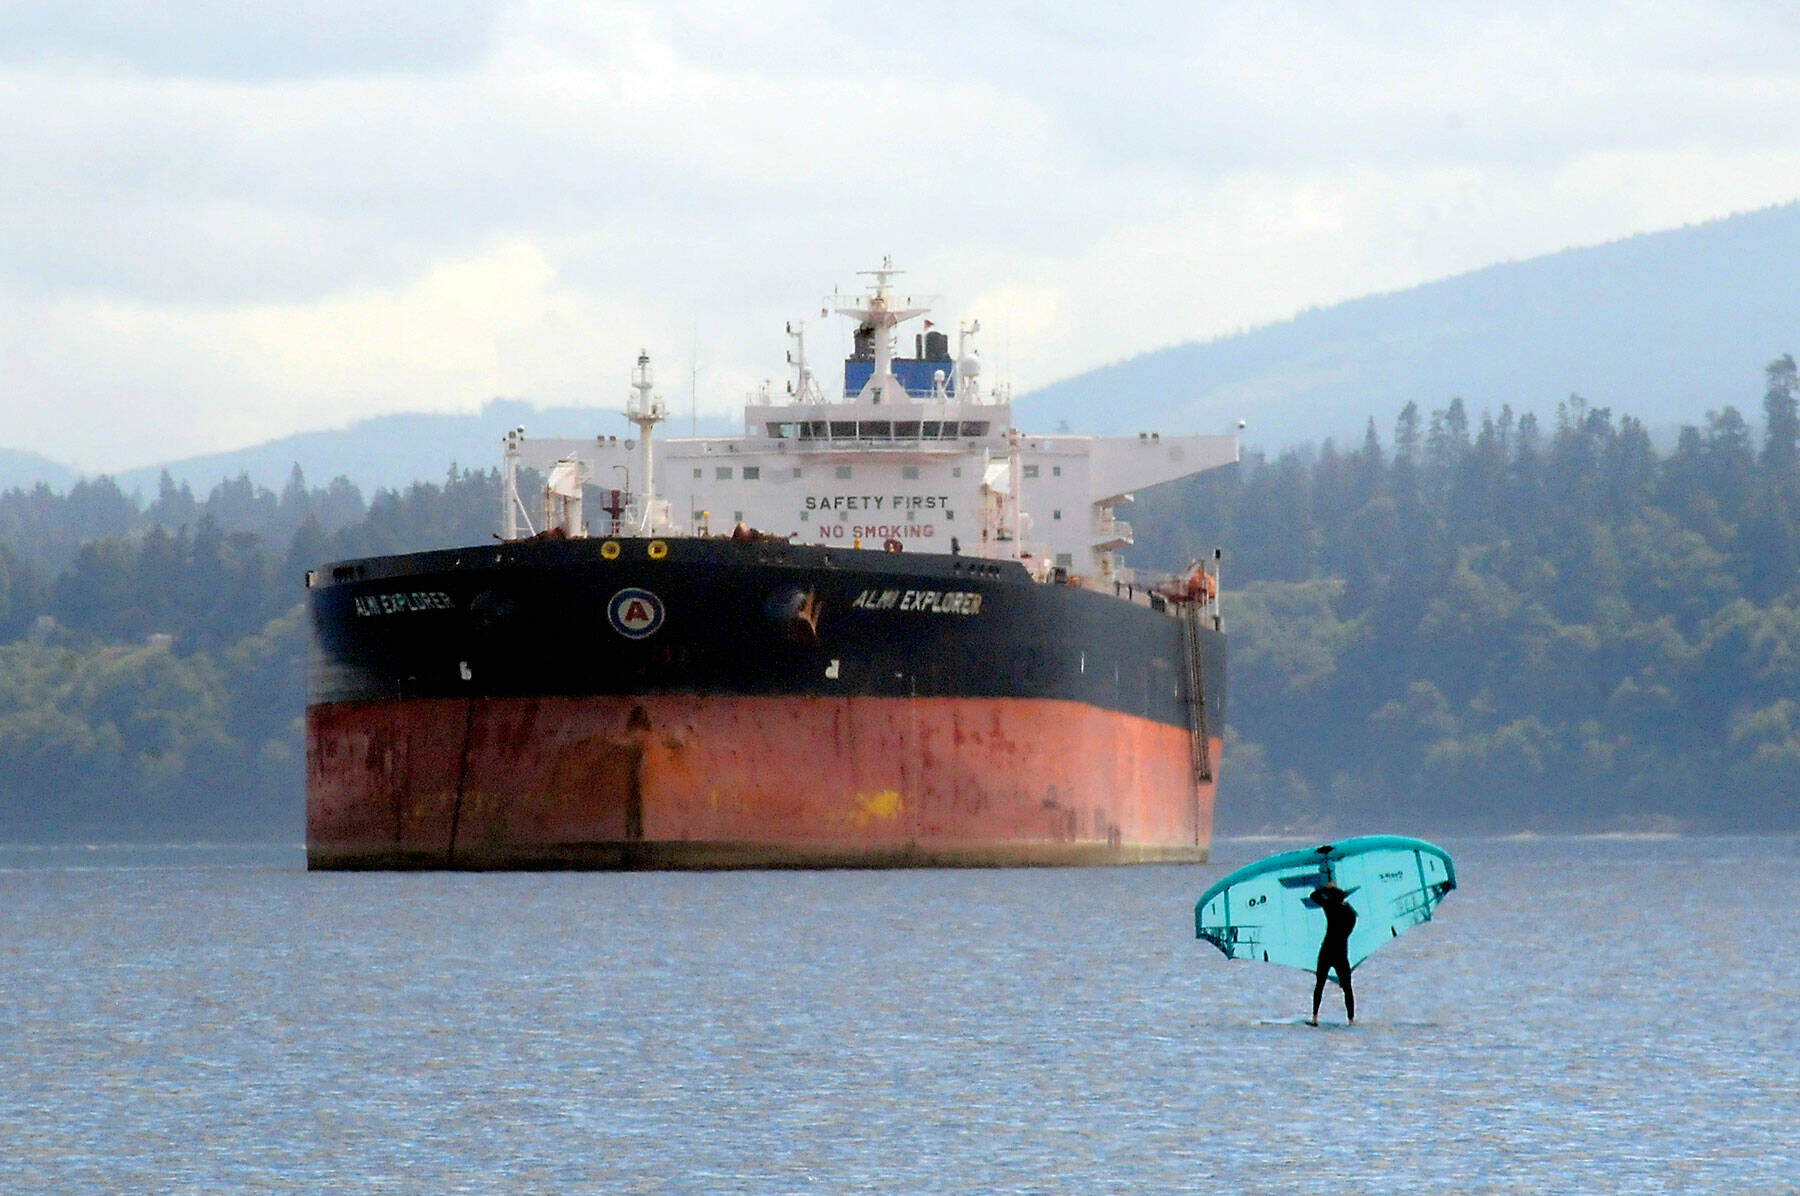 A wind foiler makes their way across the waters of Port Angeles Harbor against a backdrop of the tanker ship Almi Explorer. Moderate breezes from the Strait of Juan de Fuca made for pleasant conditions for wind-driven sports. (Keith Thorpe/Peninsula Daily News)